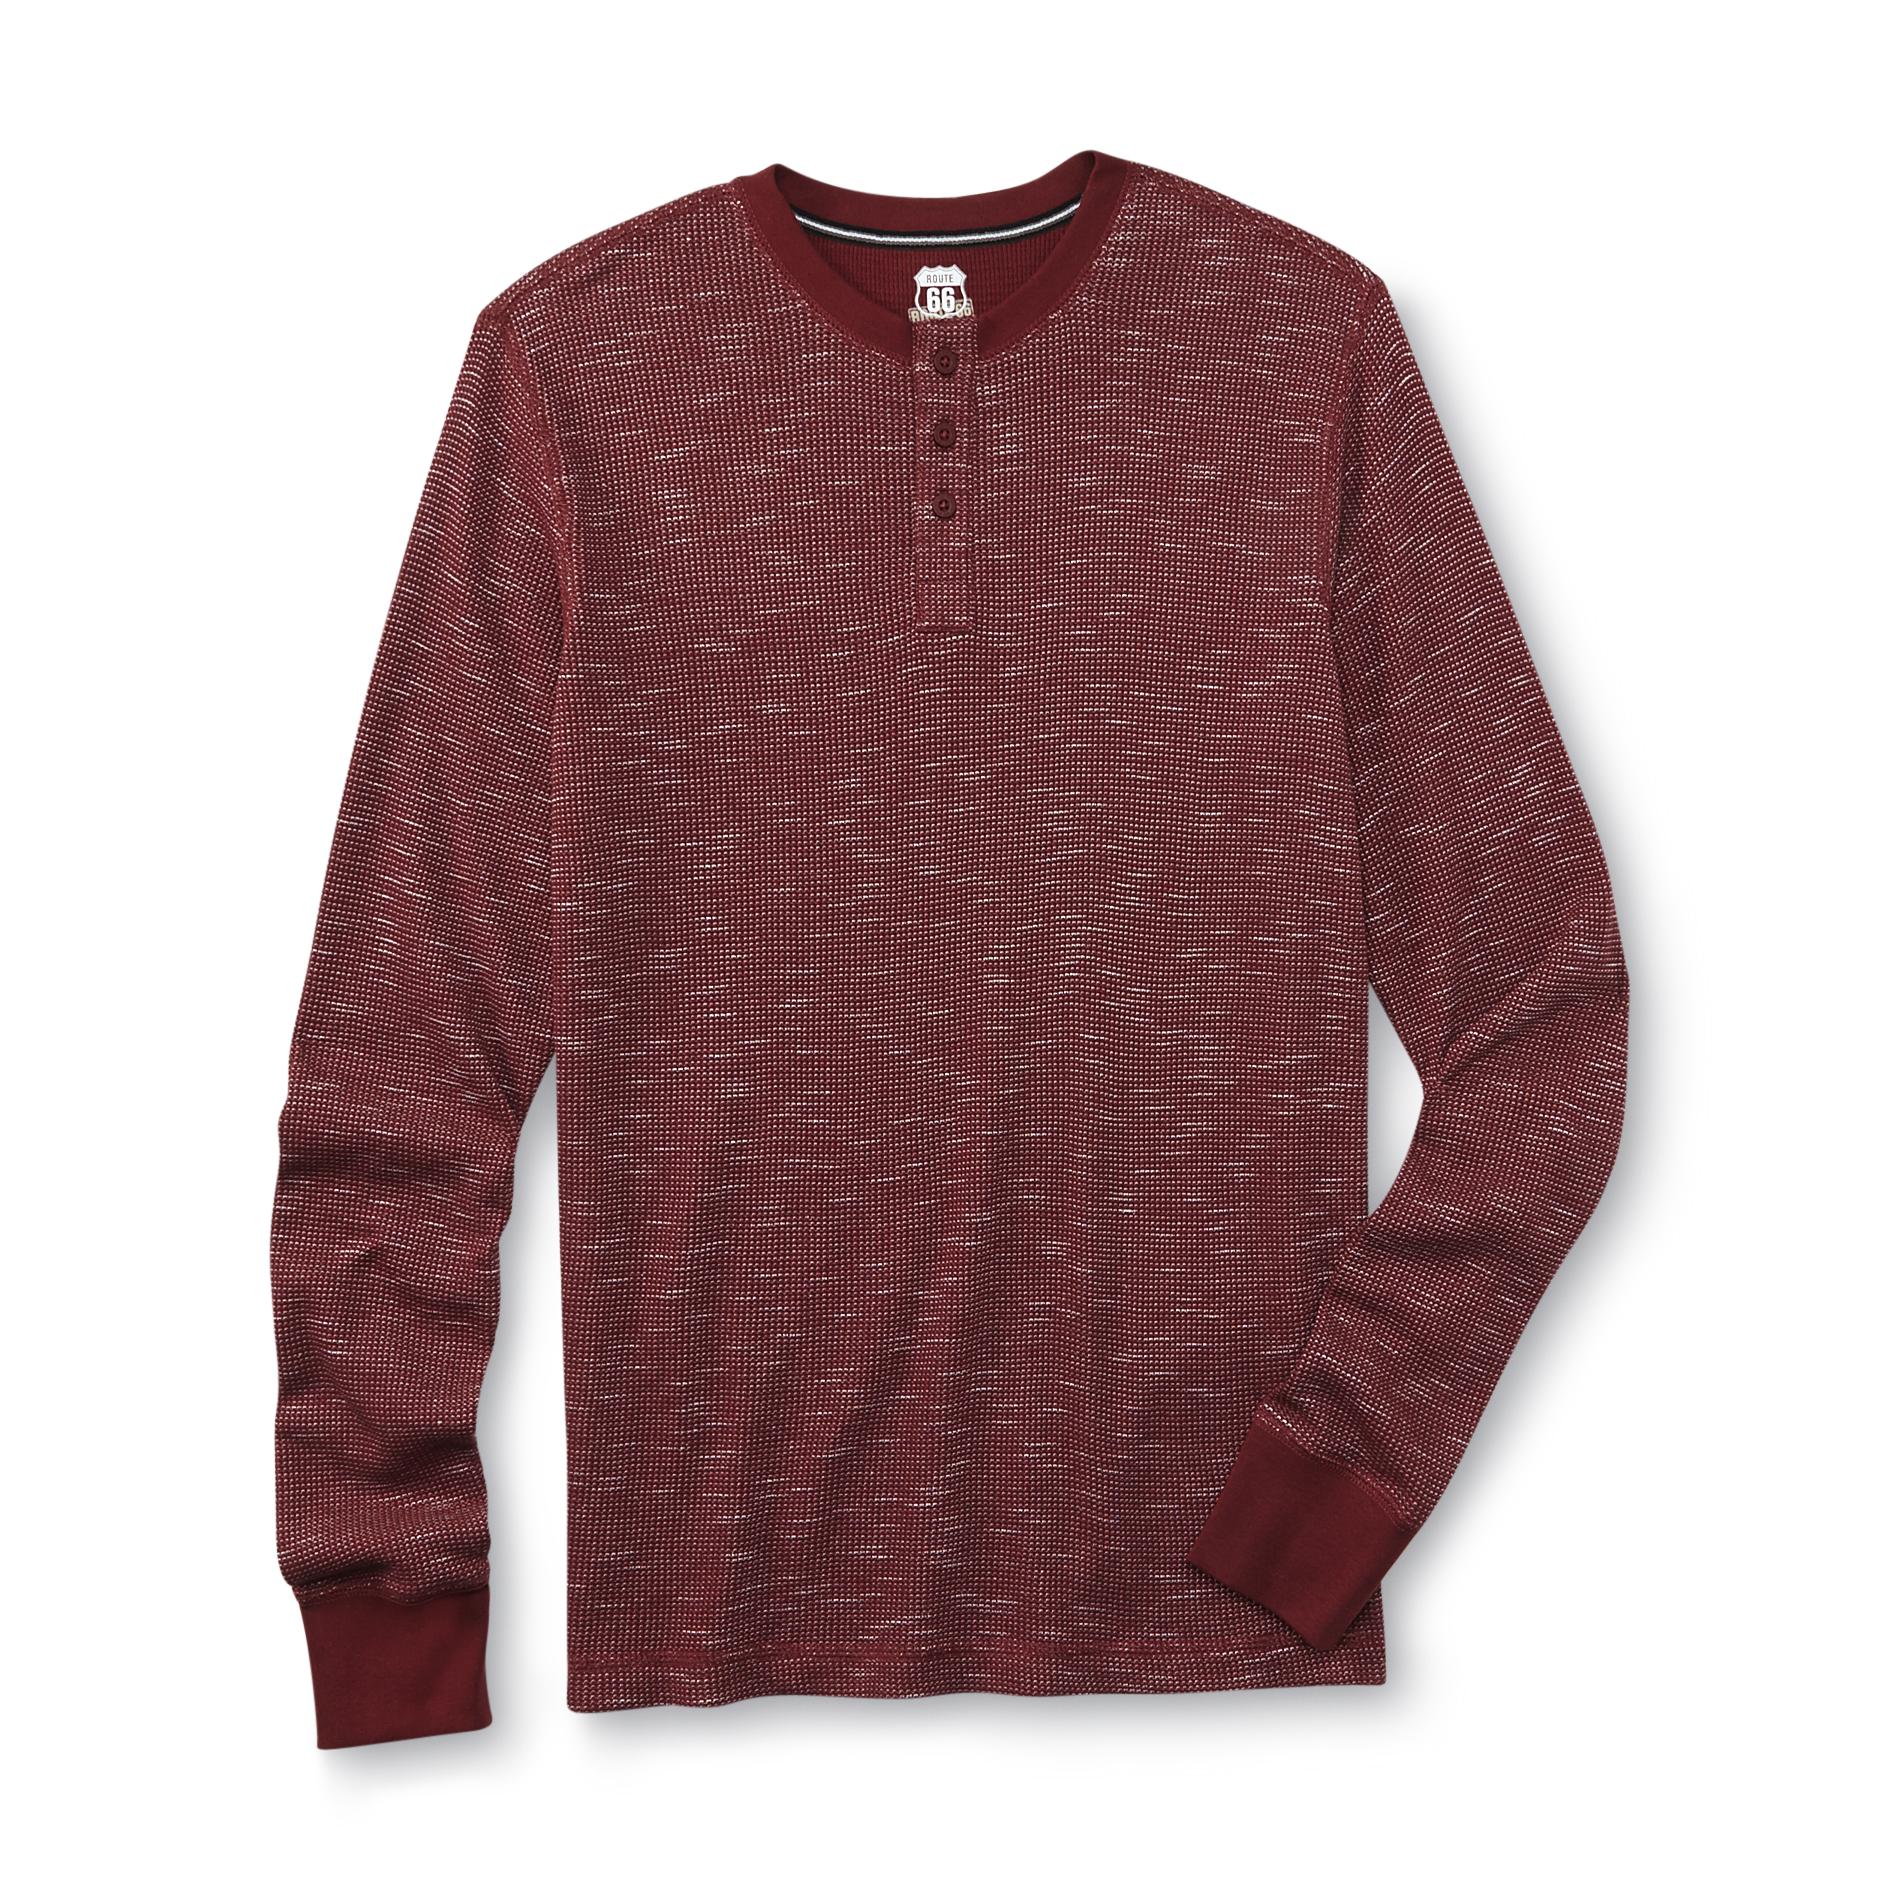 Route 66 Men's Thermal Shirt - Space-Dyed